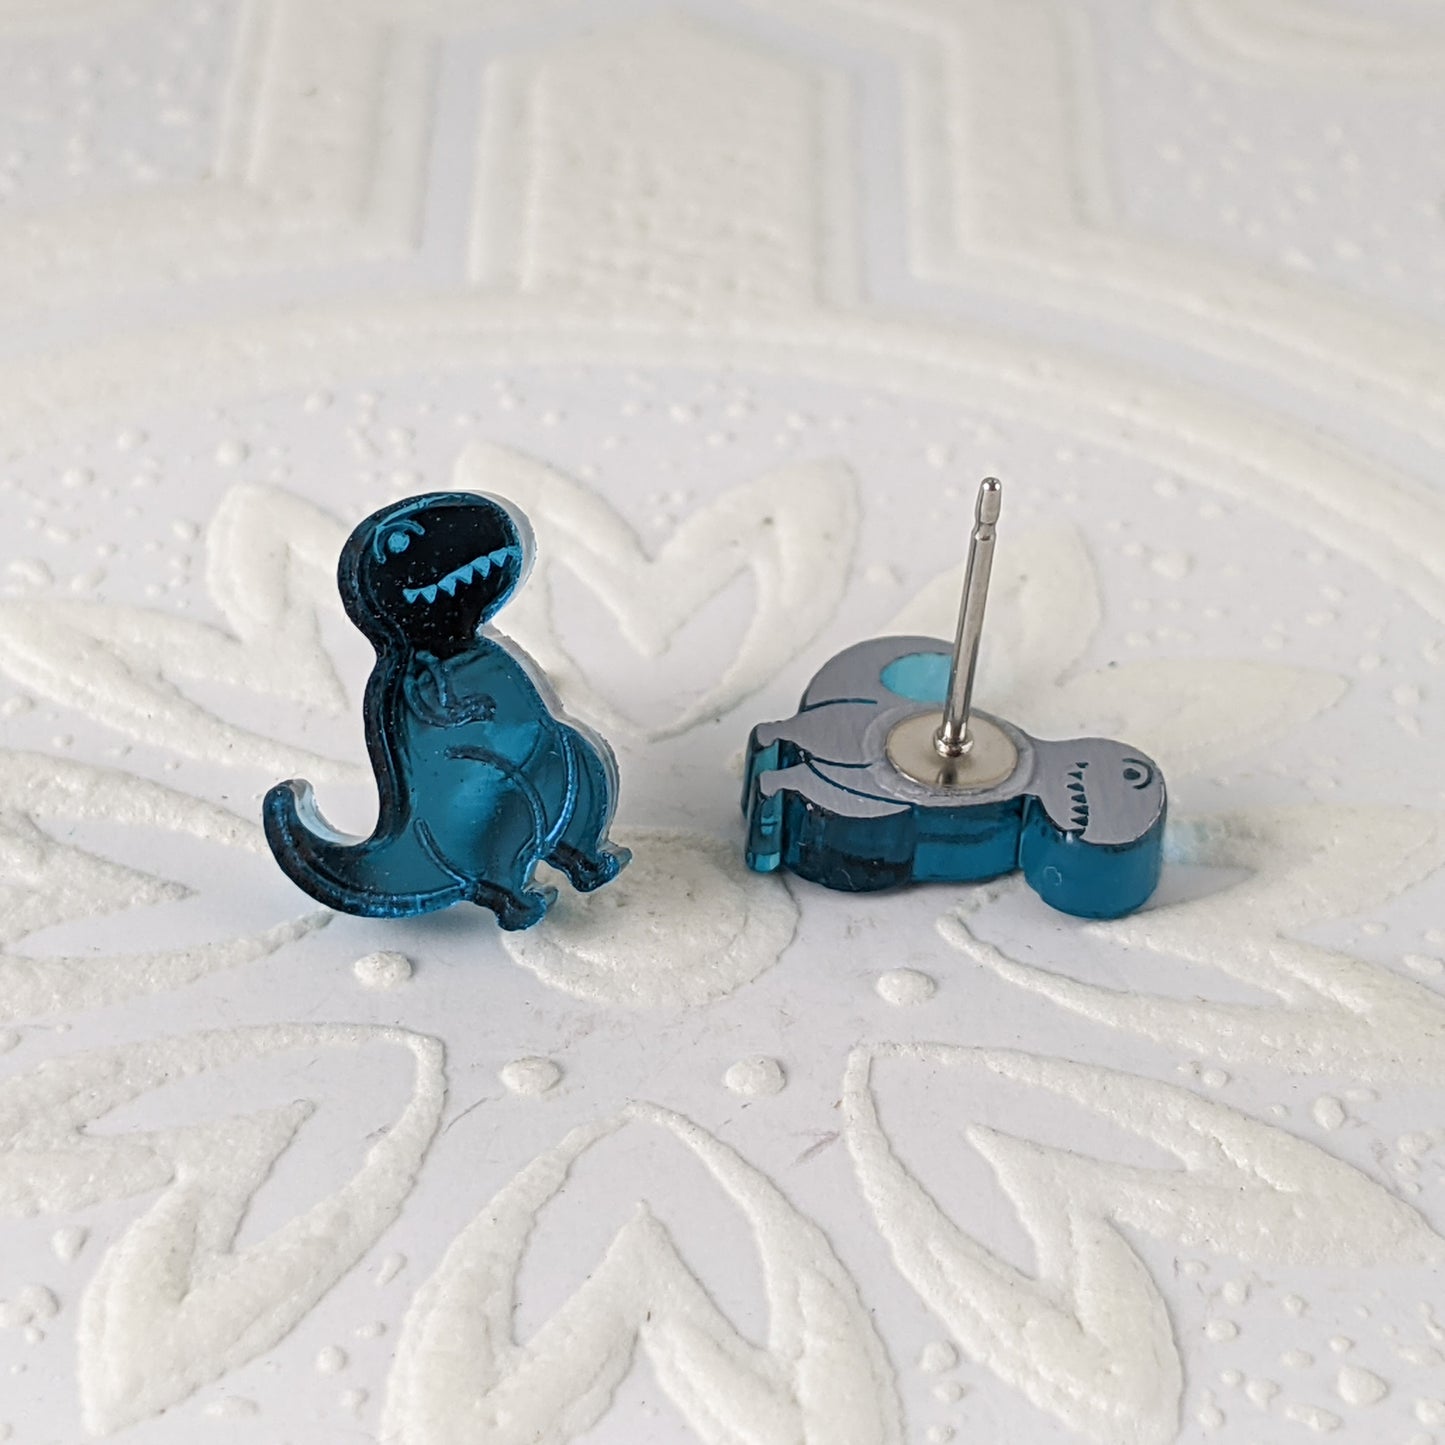 Cartoon Tyrannosaurus Rex stud earrings in teal mirrored acrylic.  Photograpehd so the shine is visible, and one Trex is face down to show the stainless steel post. By Isette.